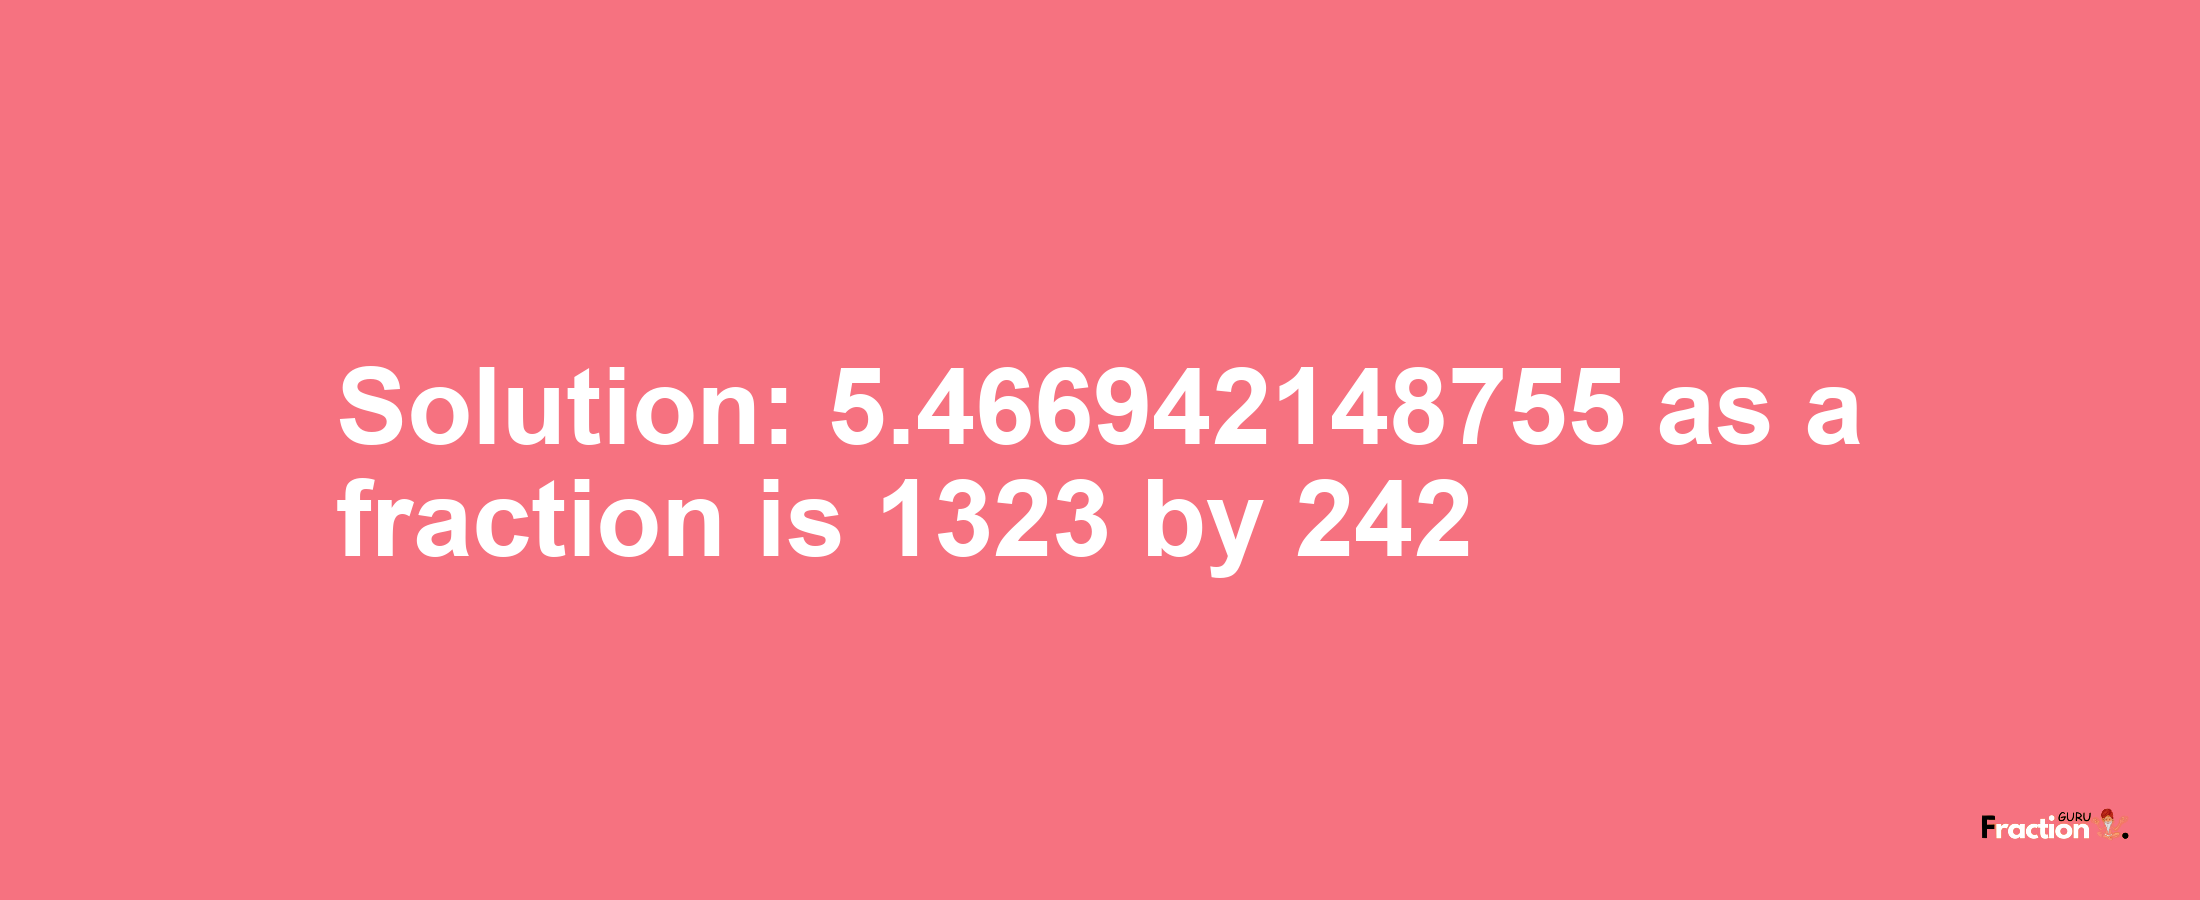 Solution:5.466942148755 as a fraction is 1323/242